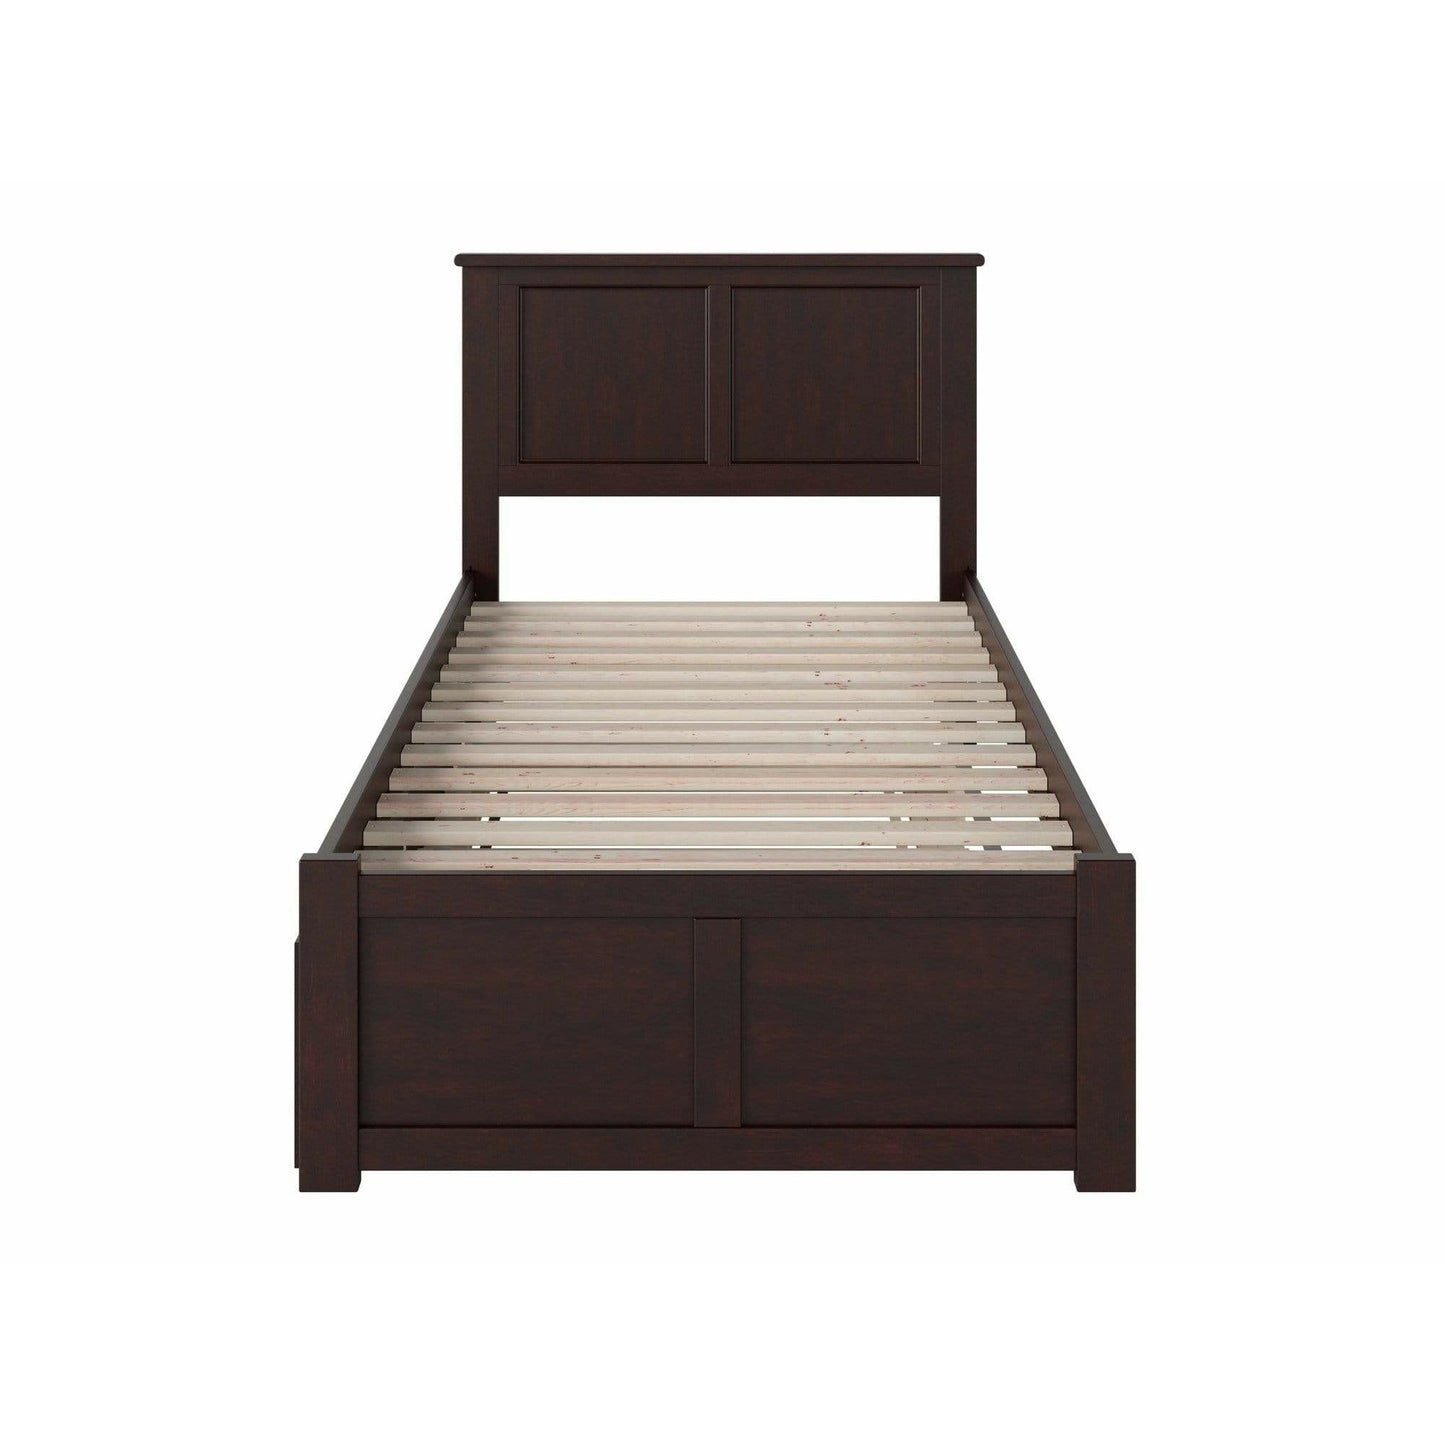 Atlantic Furniture Bed Madison Twin Platform Bed with Flat Panel Foot Board and Twin Size Urban Trundle Bed in Espresso